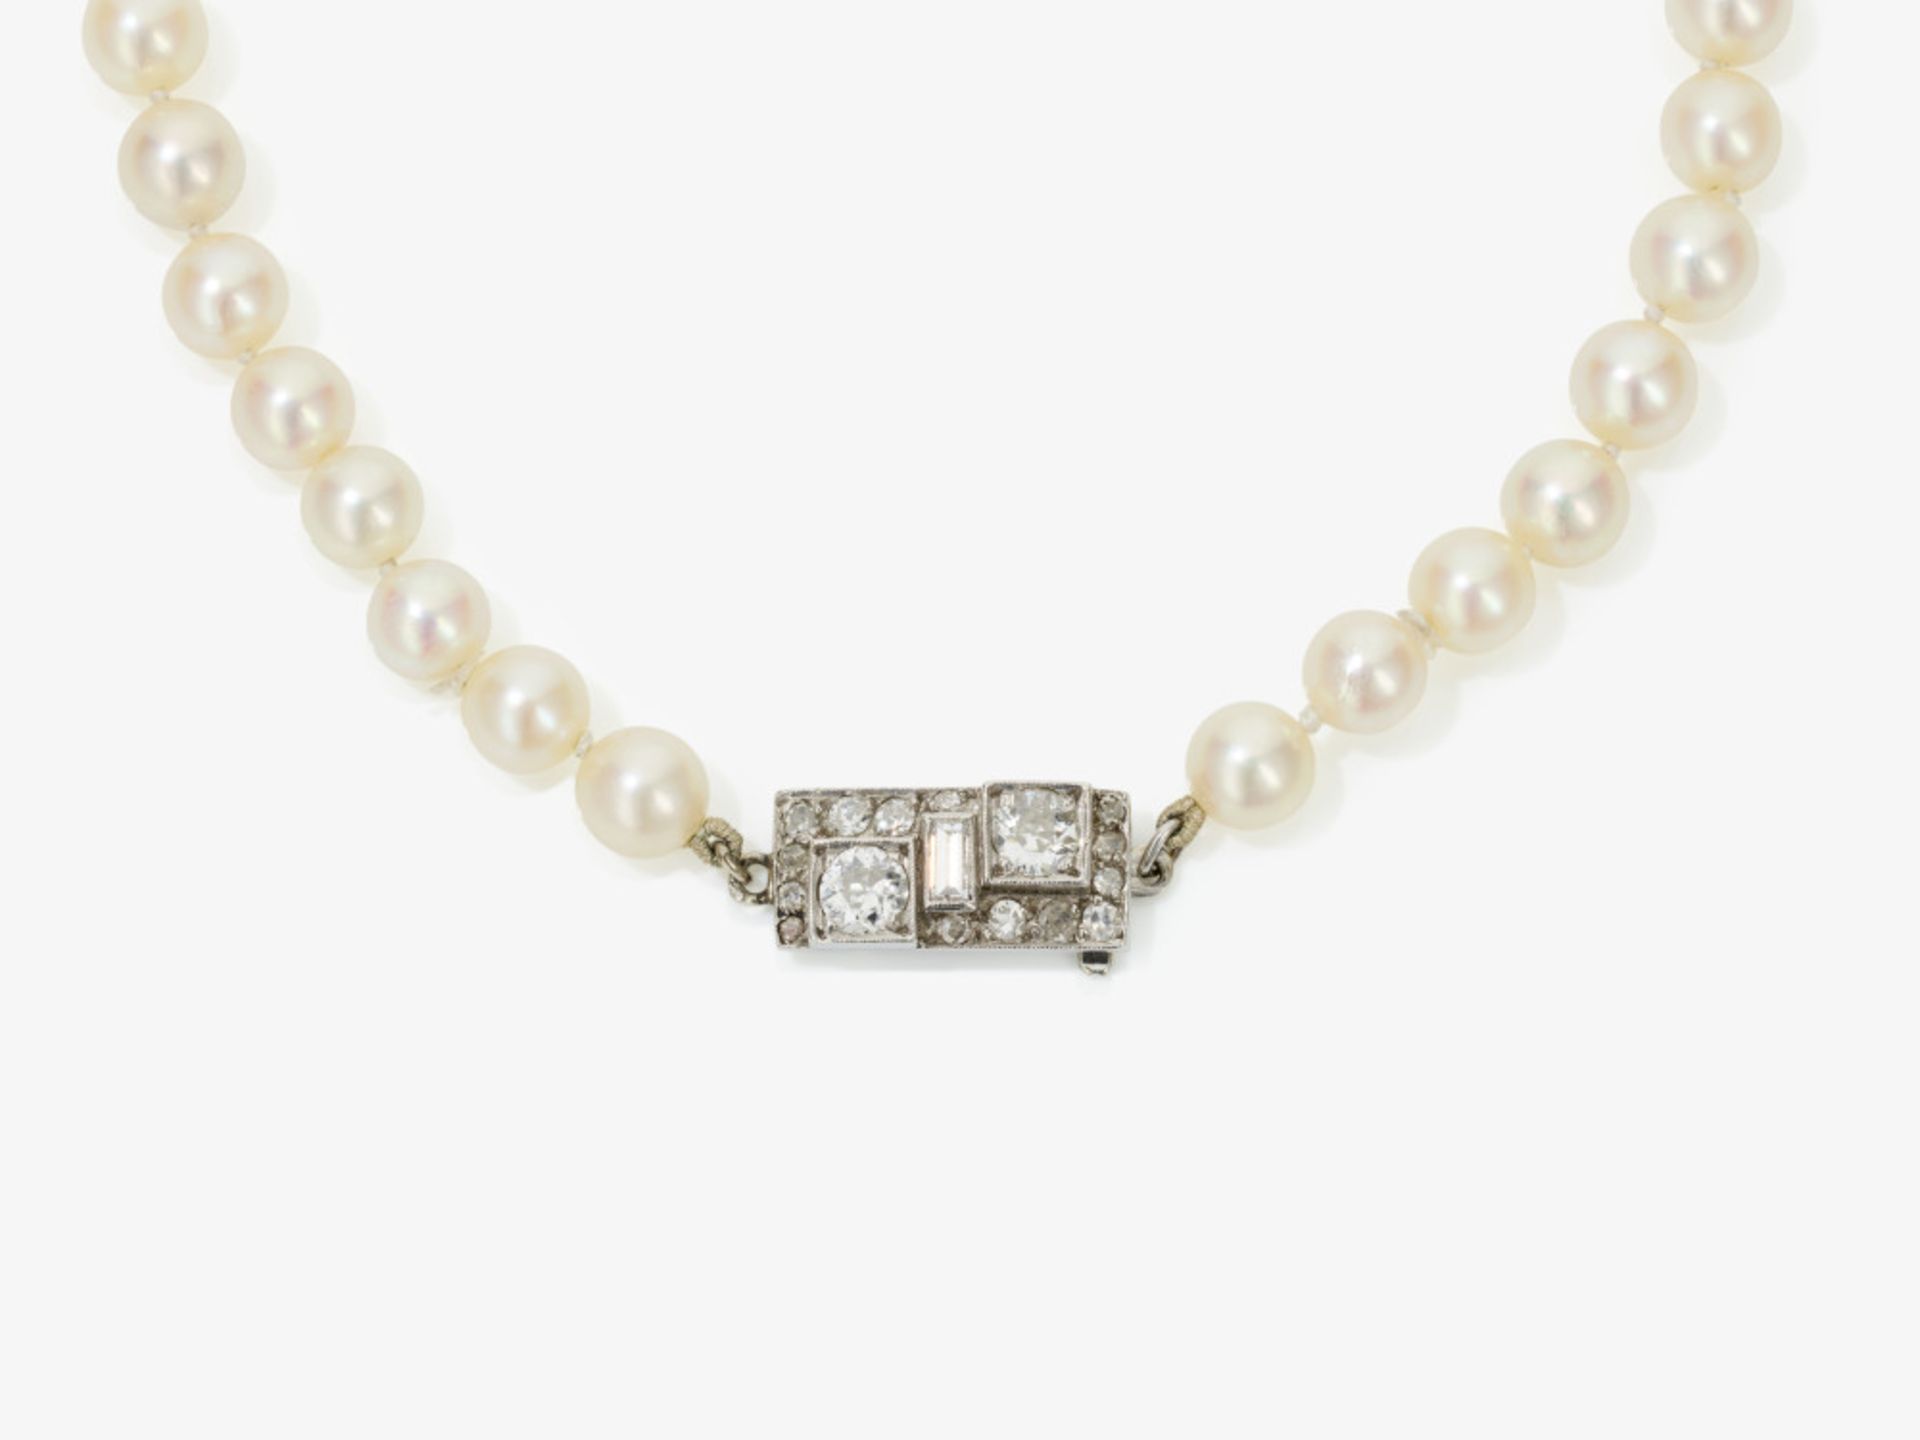 A cultured pearl necklace with diamond-studded clasp - Clasp: France, circa 1930